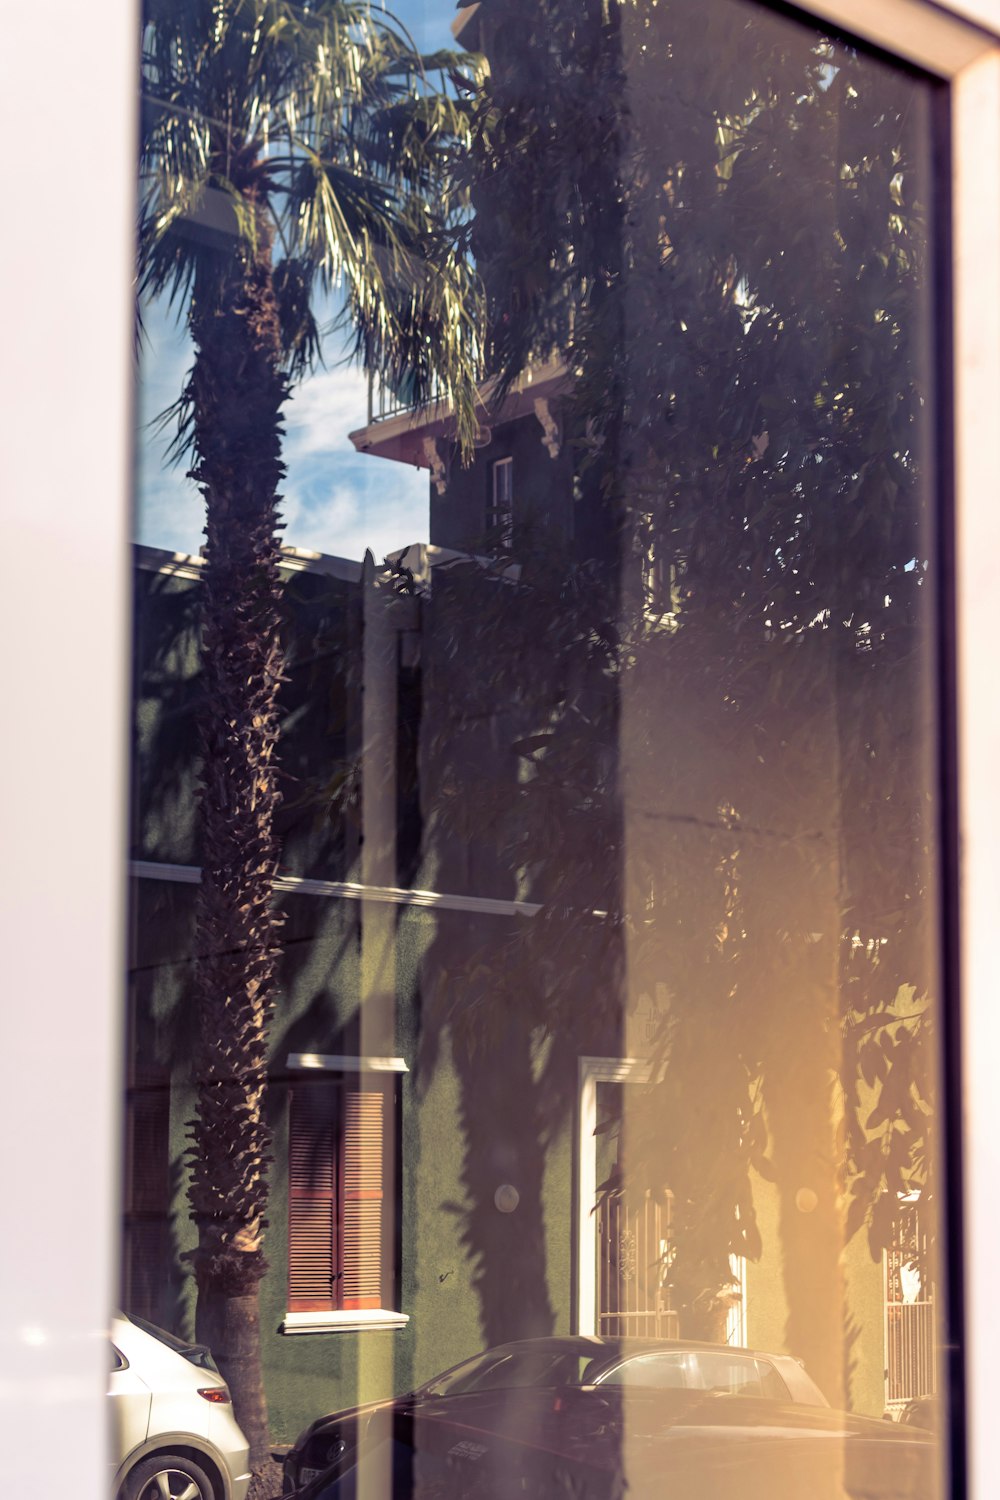 a reflection of a palm tree in a window